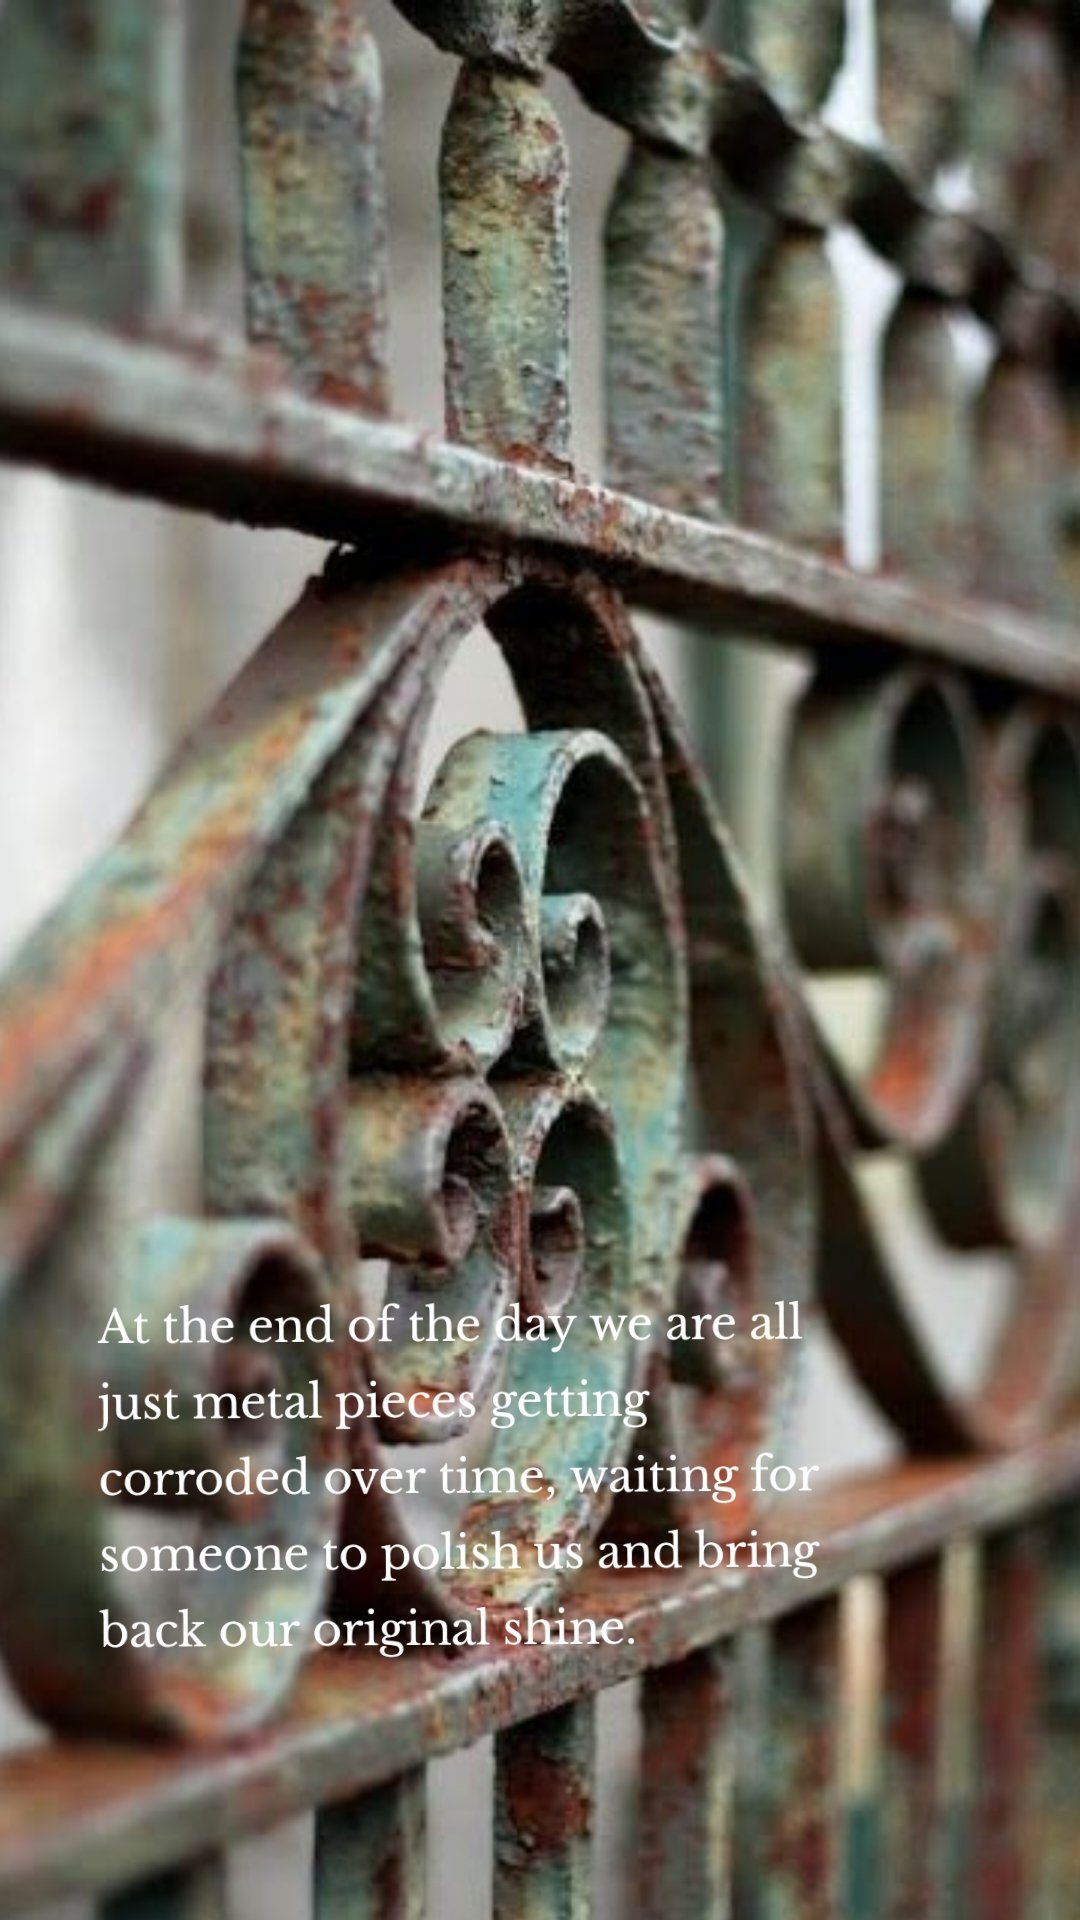 At the end of the day we are all just metal pieces getting corroded over time, waiting for someone to polish us and bring back our original shine.